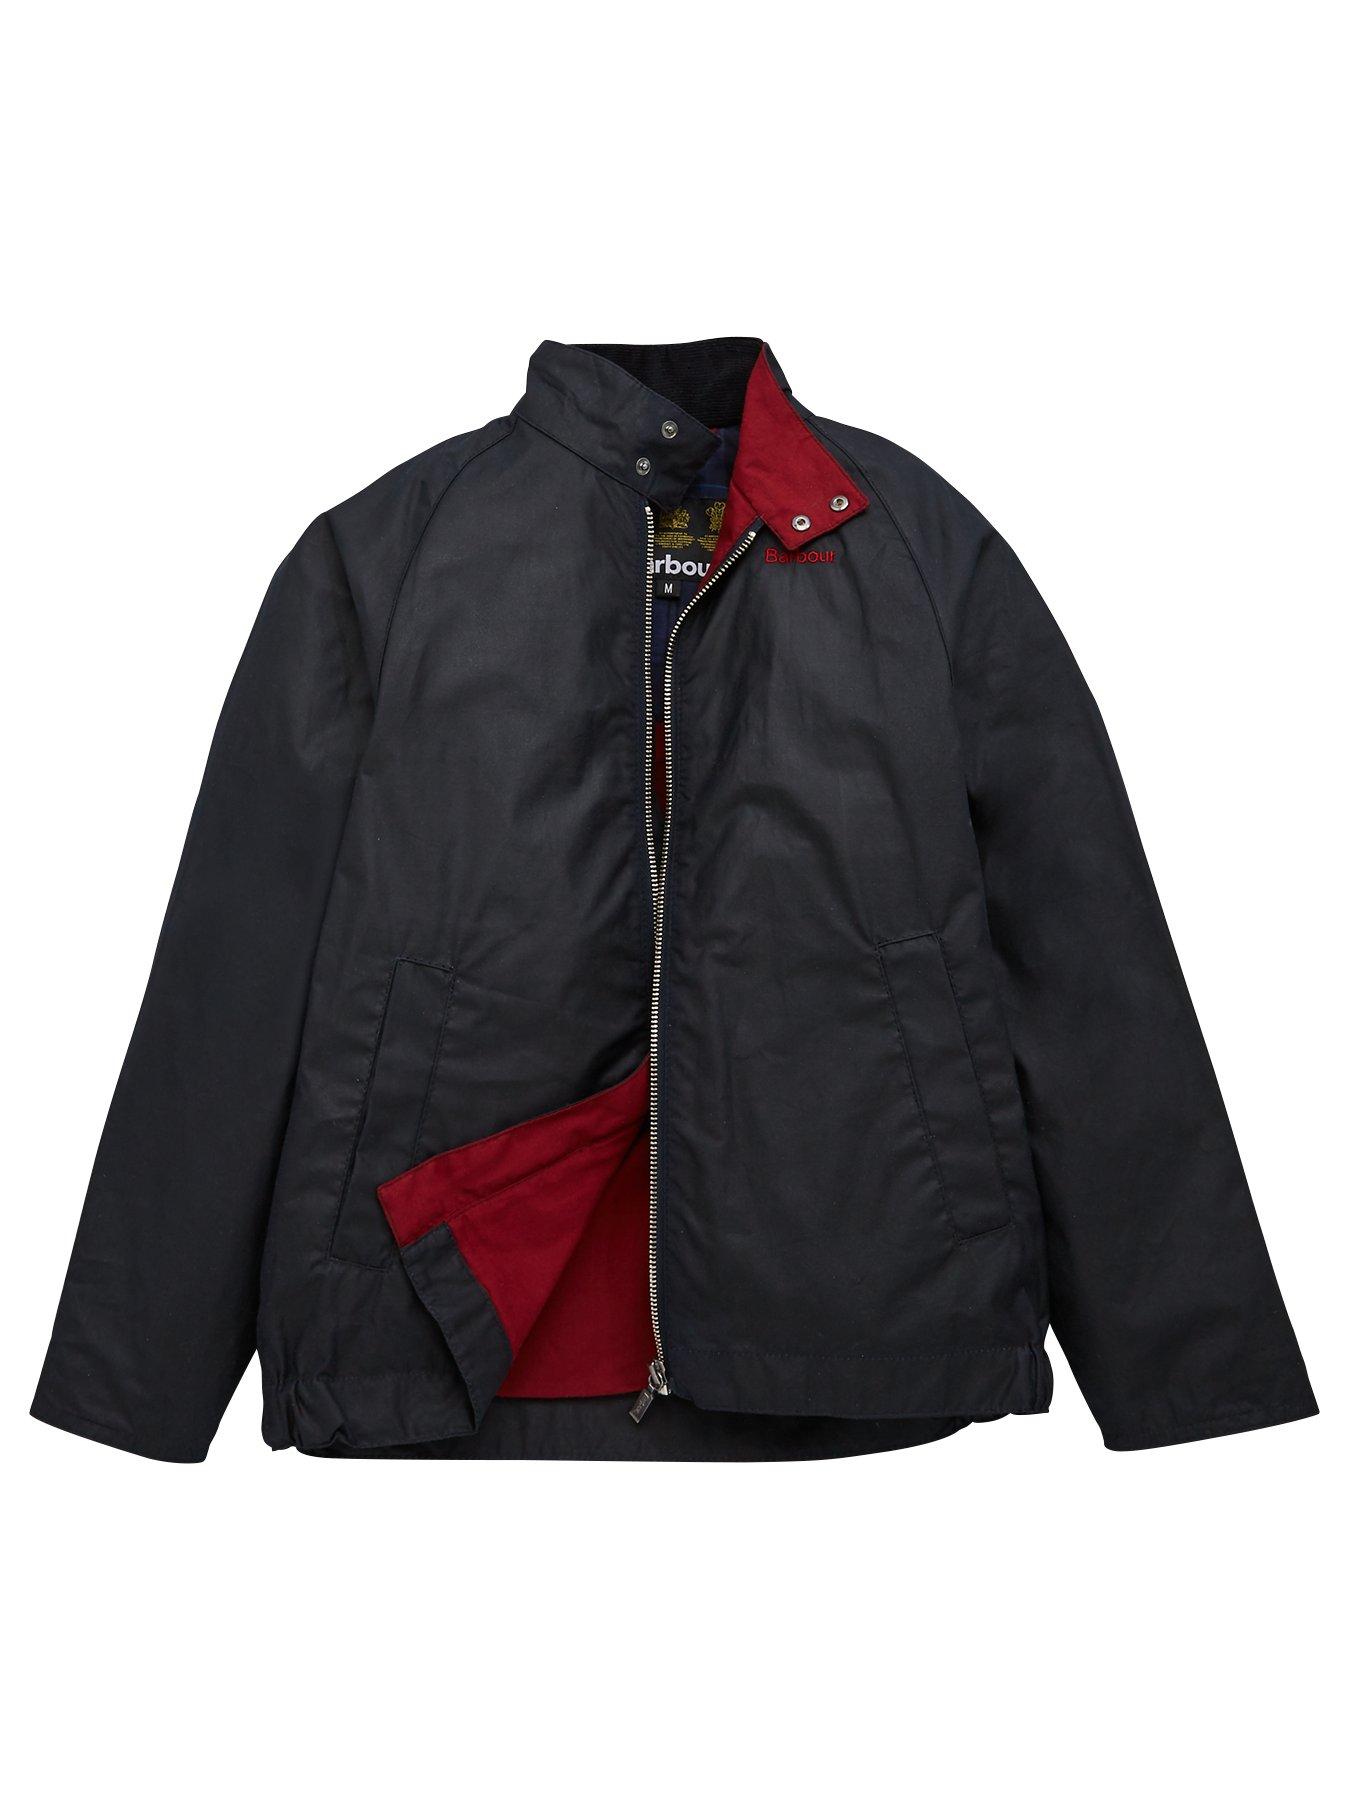 childrens barbour jacket size guide